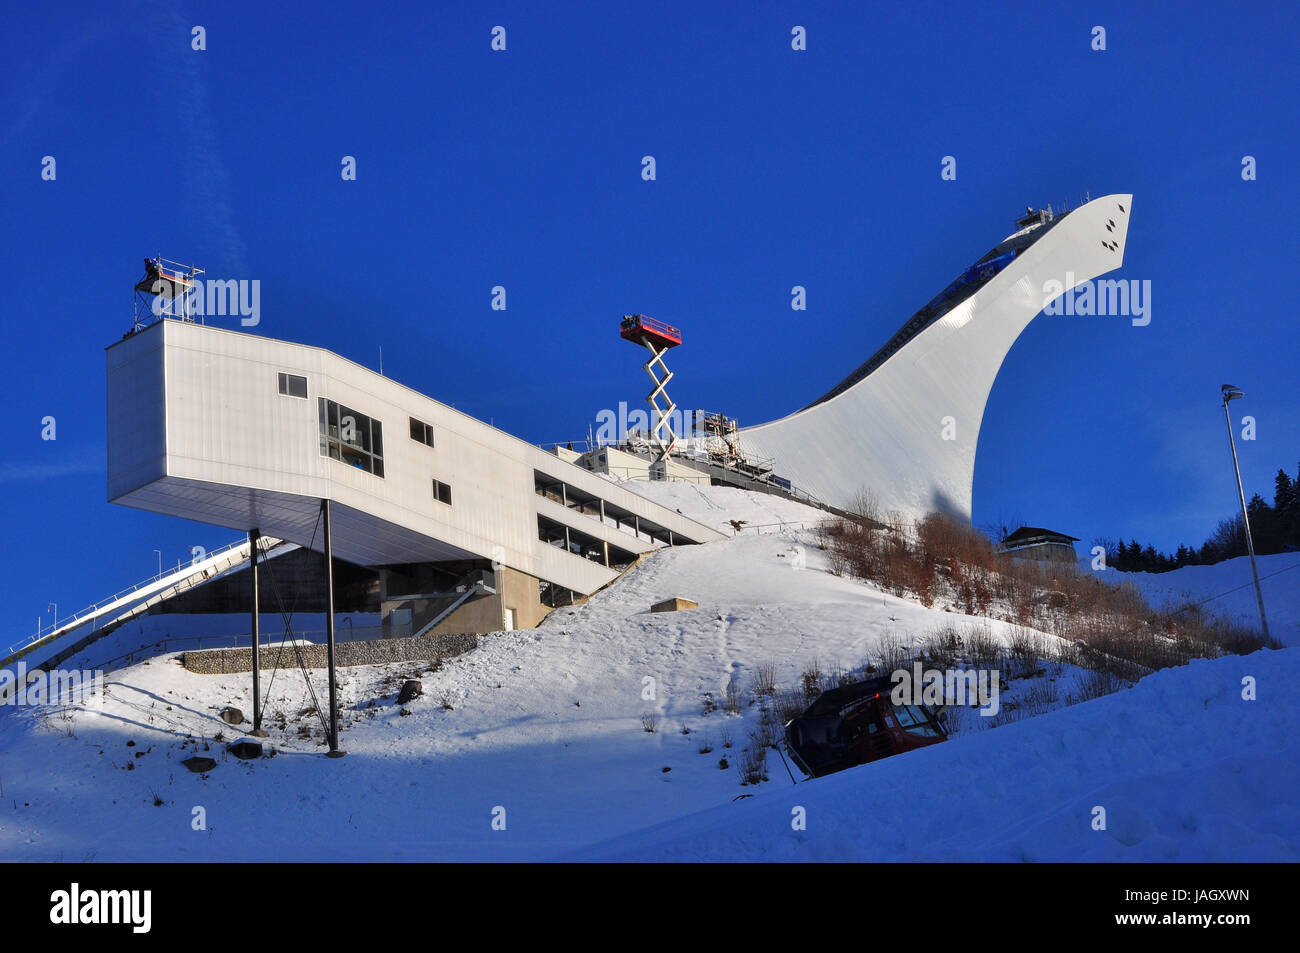 Olympic Ski Jump Tower High Resolution Stock Photography and Images - Alamy